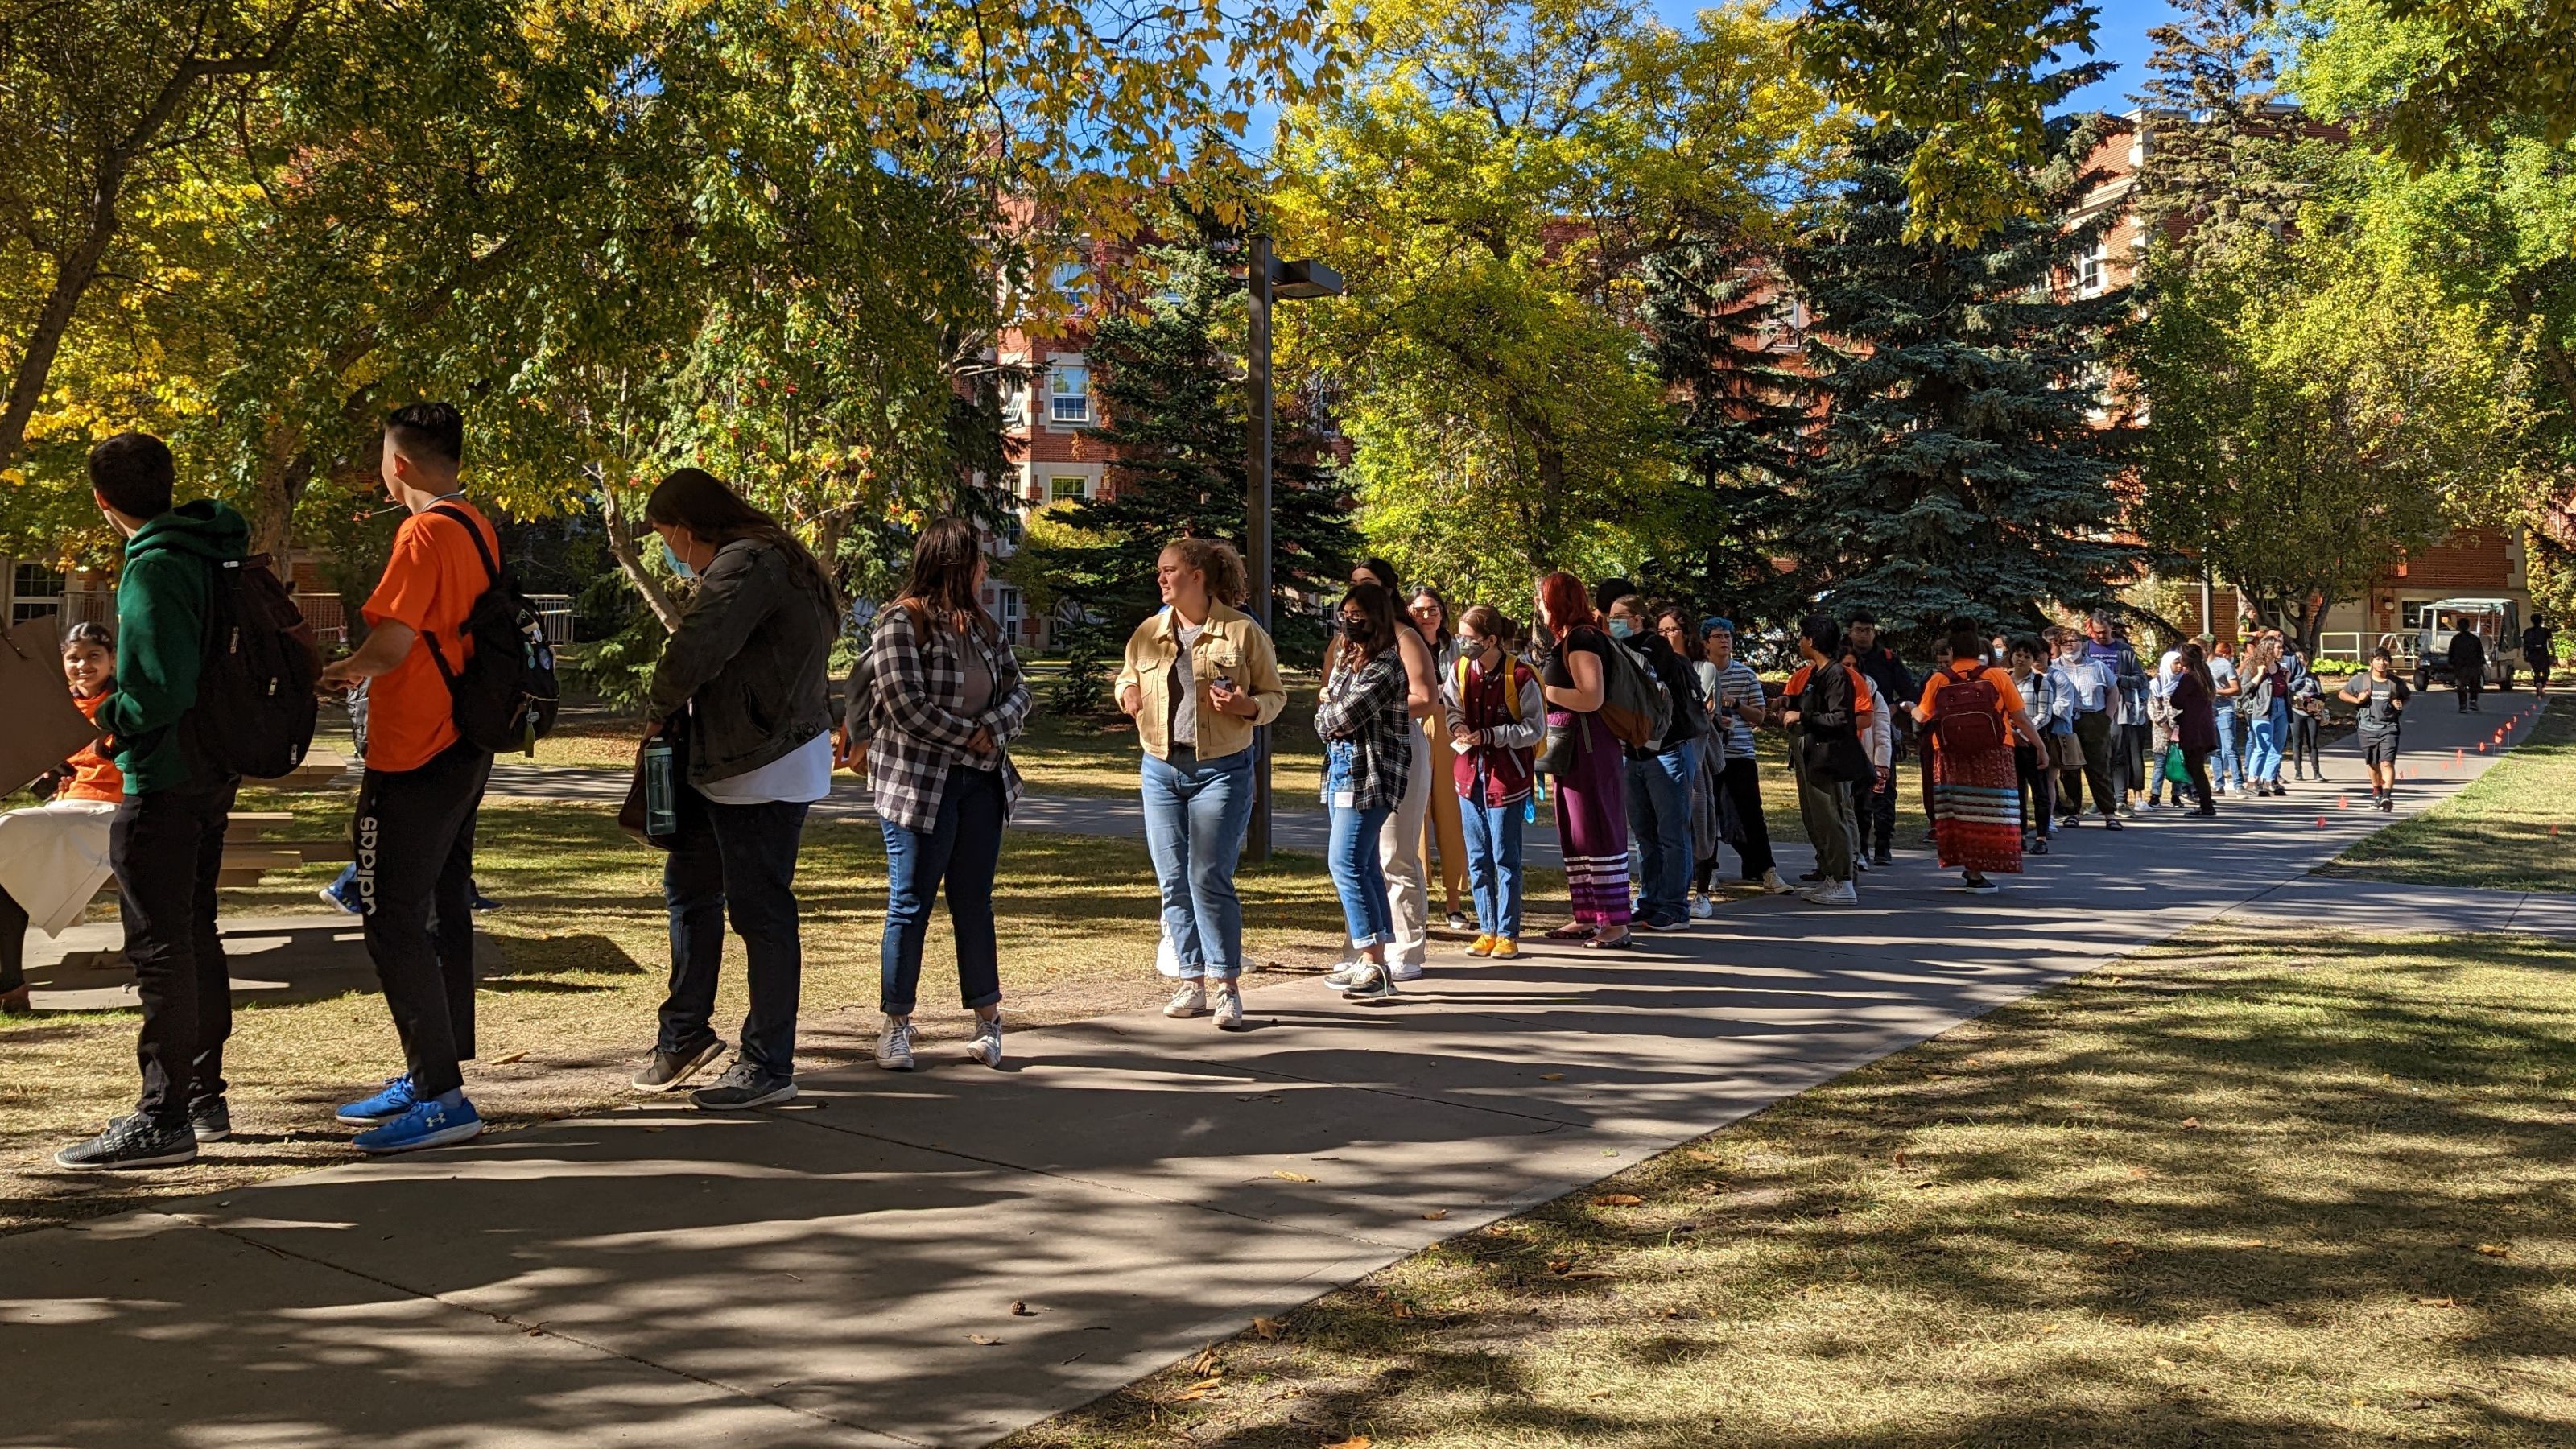 Participants line up to place flags as part of the Residential School Memorial in Main Quad of North Campus.